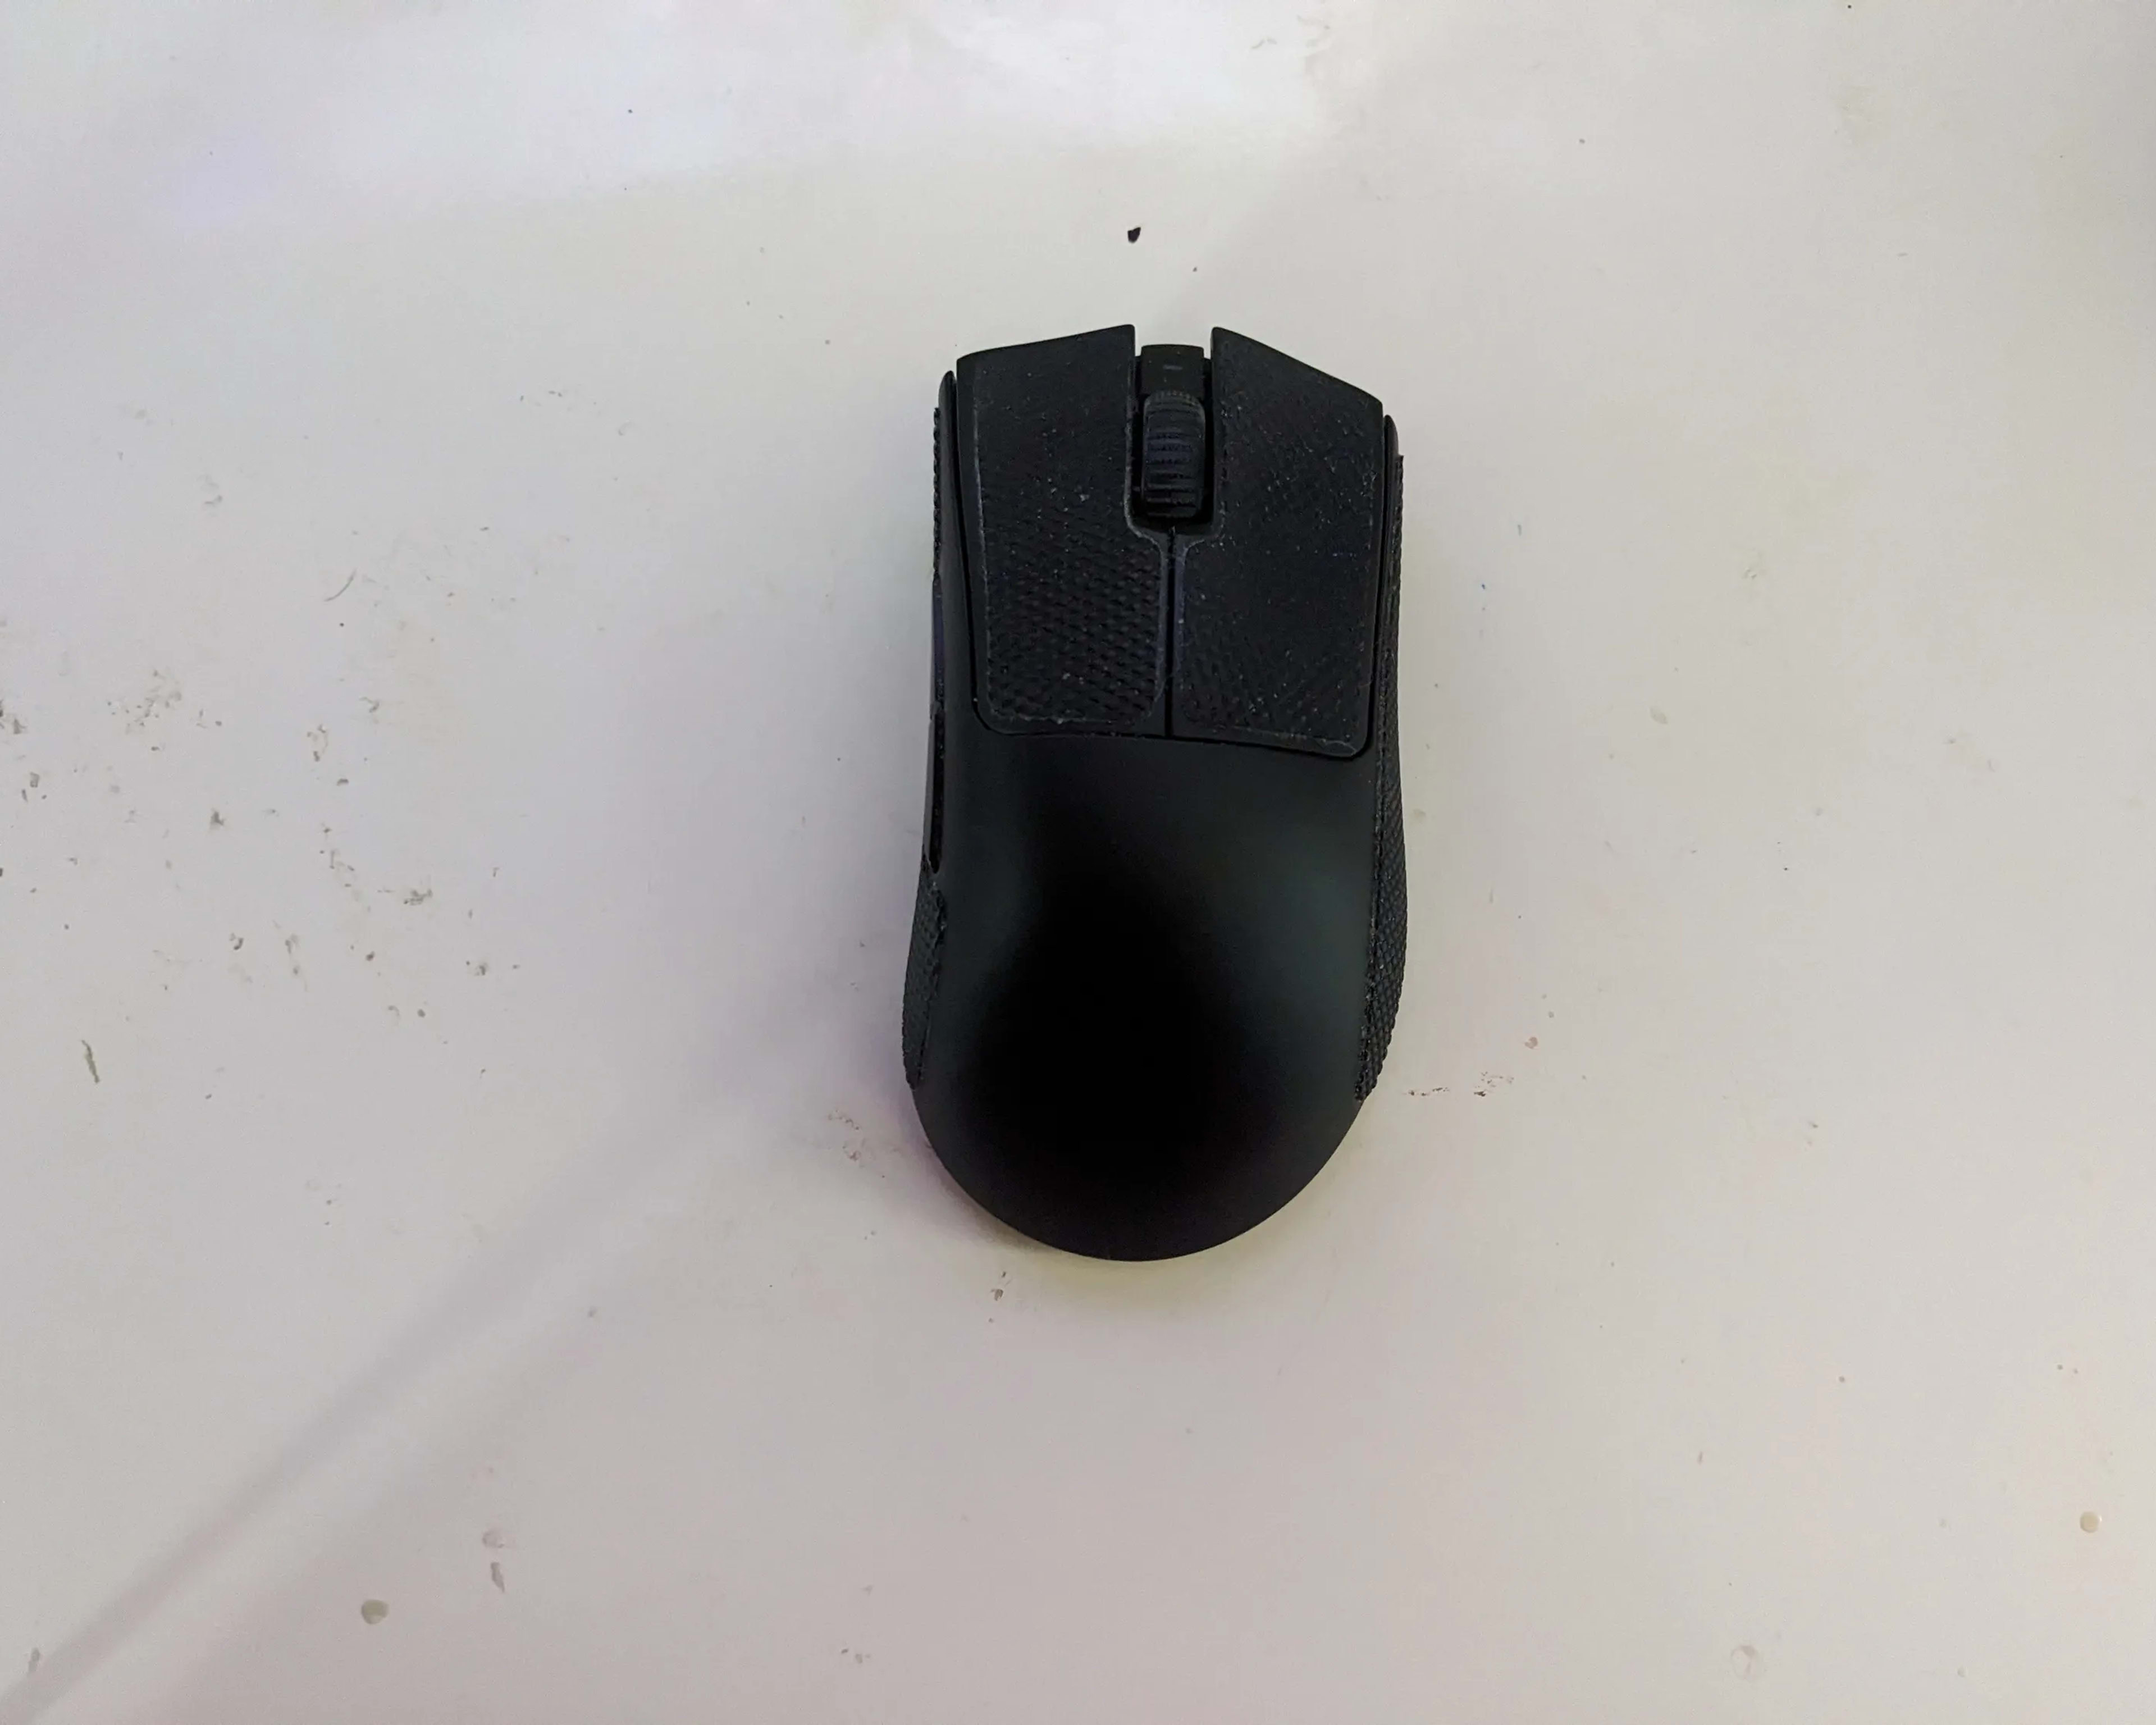 Razer DeathAdder V3 Pro with Hyperpolling 8K Dongle with Razer Atlas Glass Mousepad